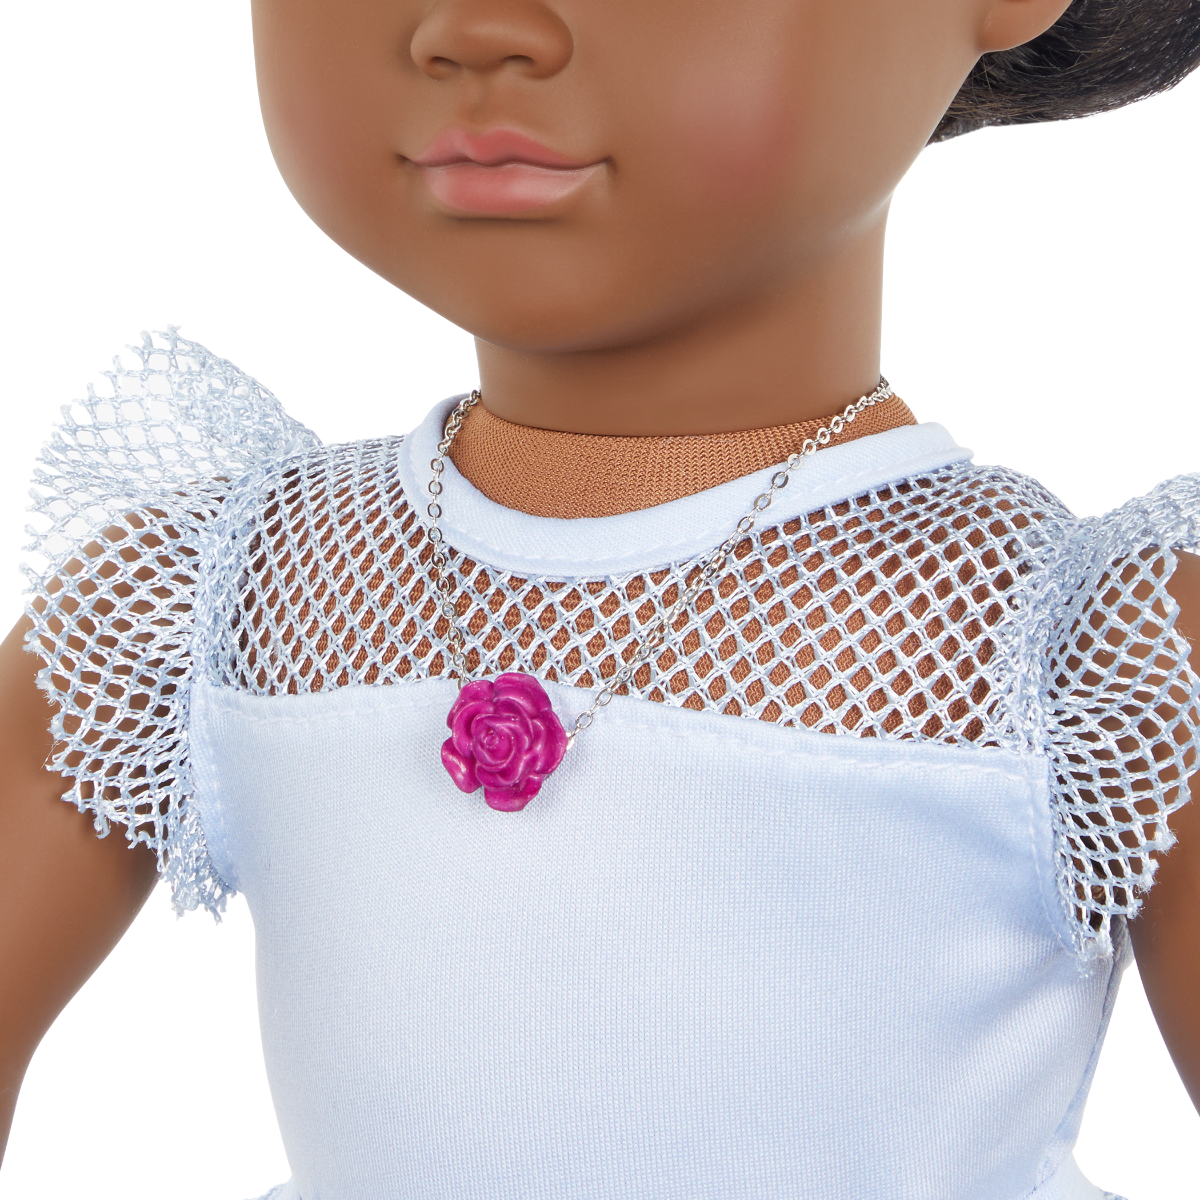 Our Generation Fashion Starter Kit & 18-inch Doll Rosalind